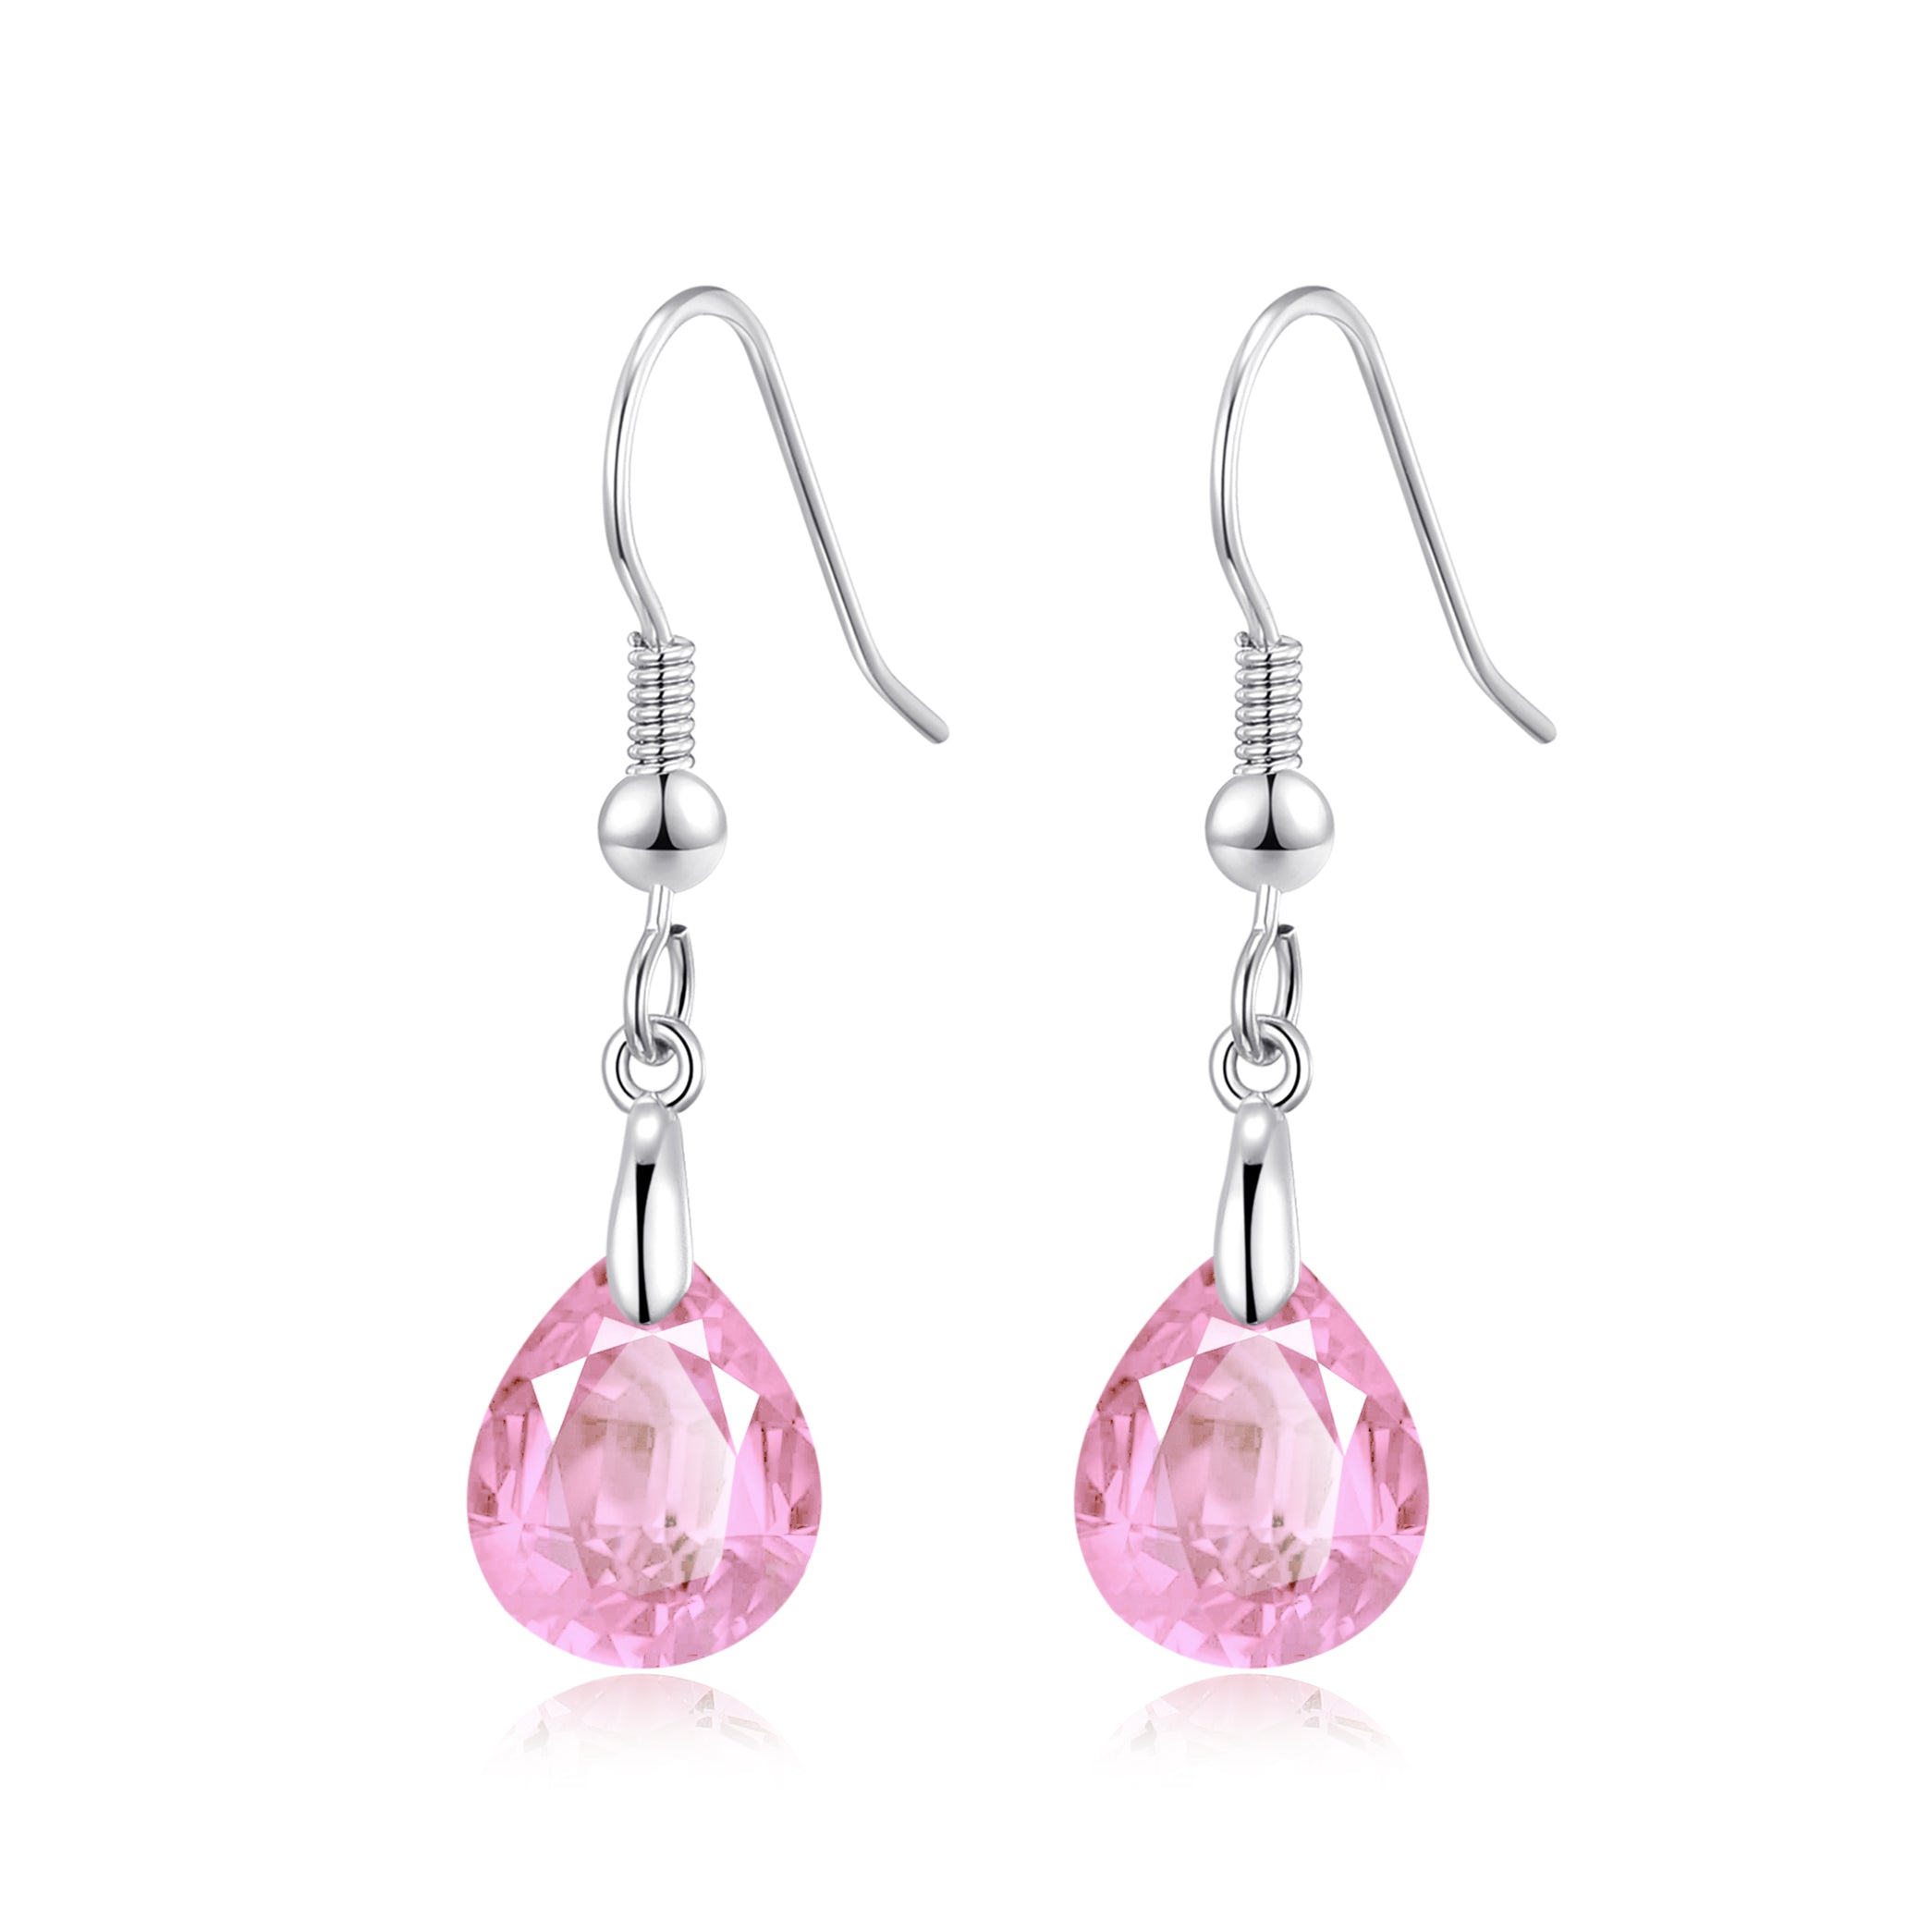 Sterling Silver Light Rose Pear Earrings Created with Zircondia® Crystals by Philip Jones Jewellery